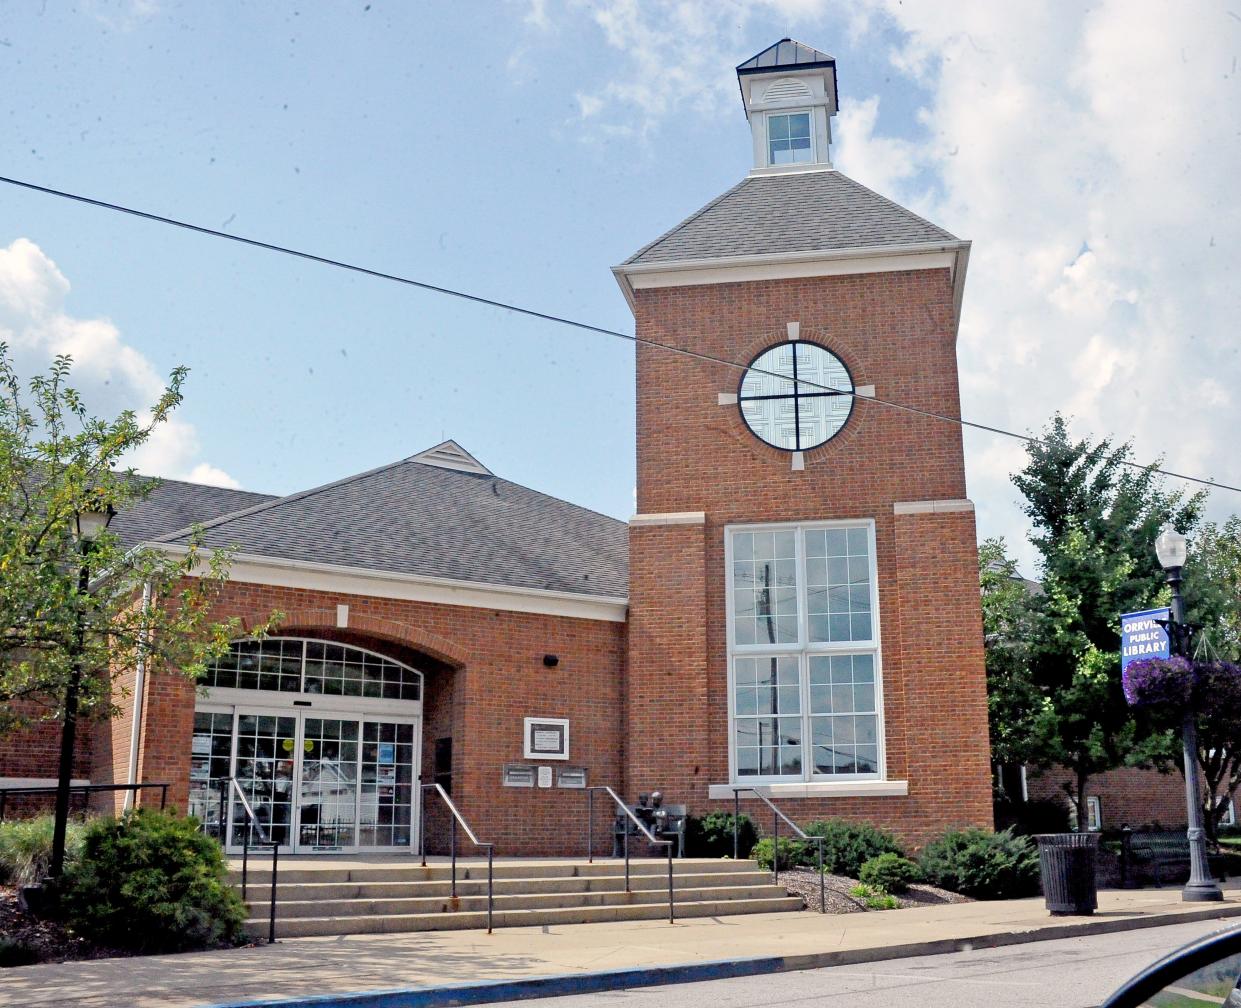 The Orrville Public Library is located at 230 N. Main St. in Orrville.